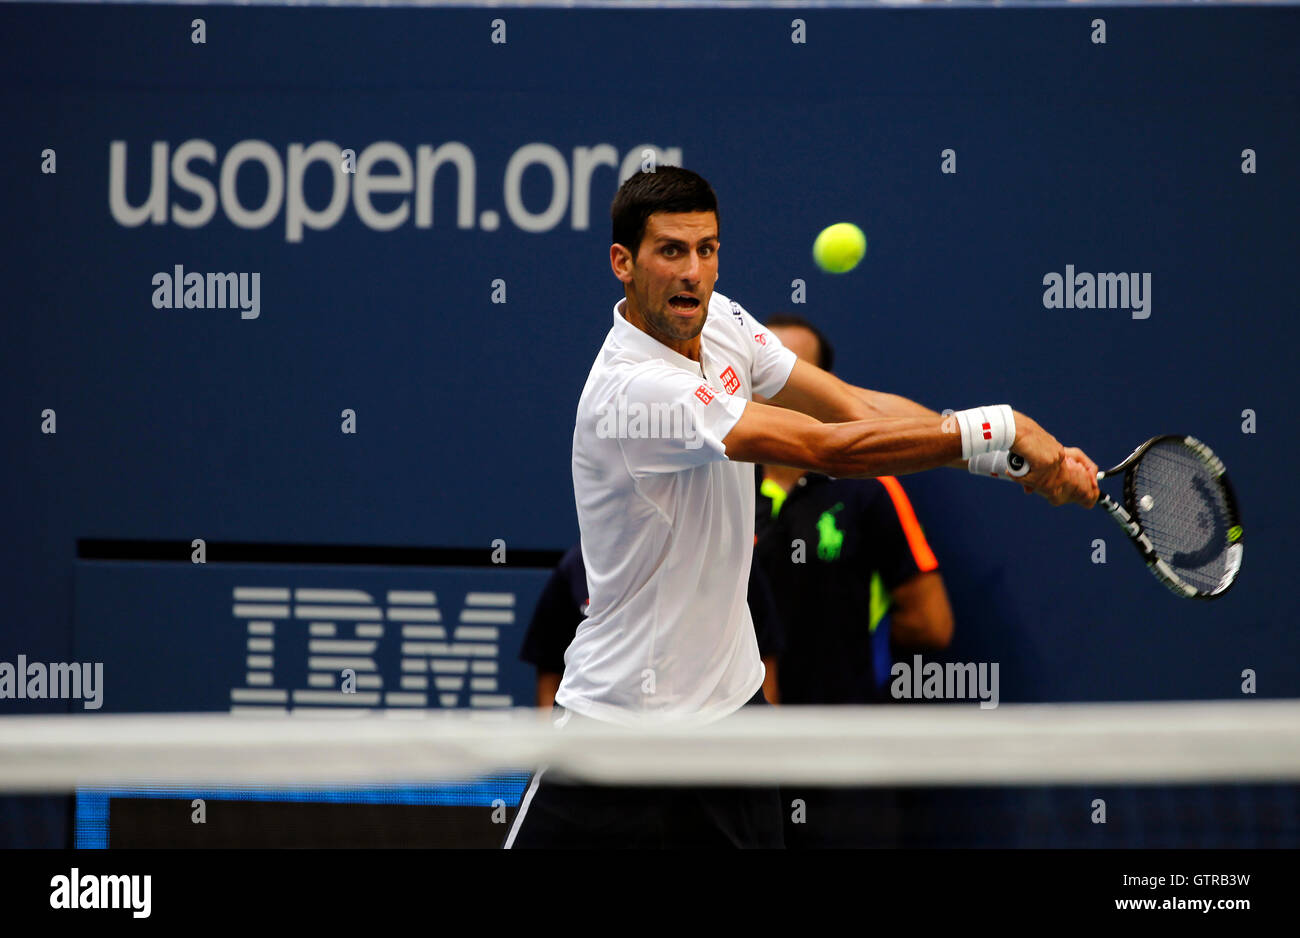 New York, United States. 09th Sep, 2016. Novak Djokovic during his semi final match against Gael Monfils of France at the United States Open Tennis Championships at Flushing Meadows, New York on Friday, September 9th. Djokovic won the match in four sets to advance to the final Credit: © Adam Stoltman/Alamy Live News  Stock Photo